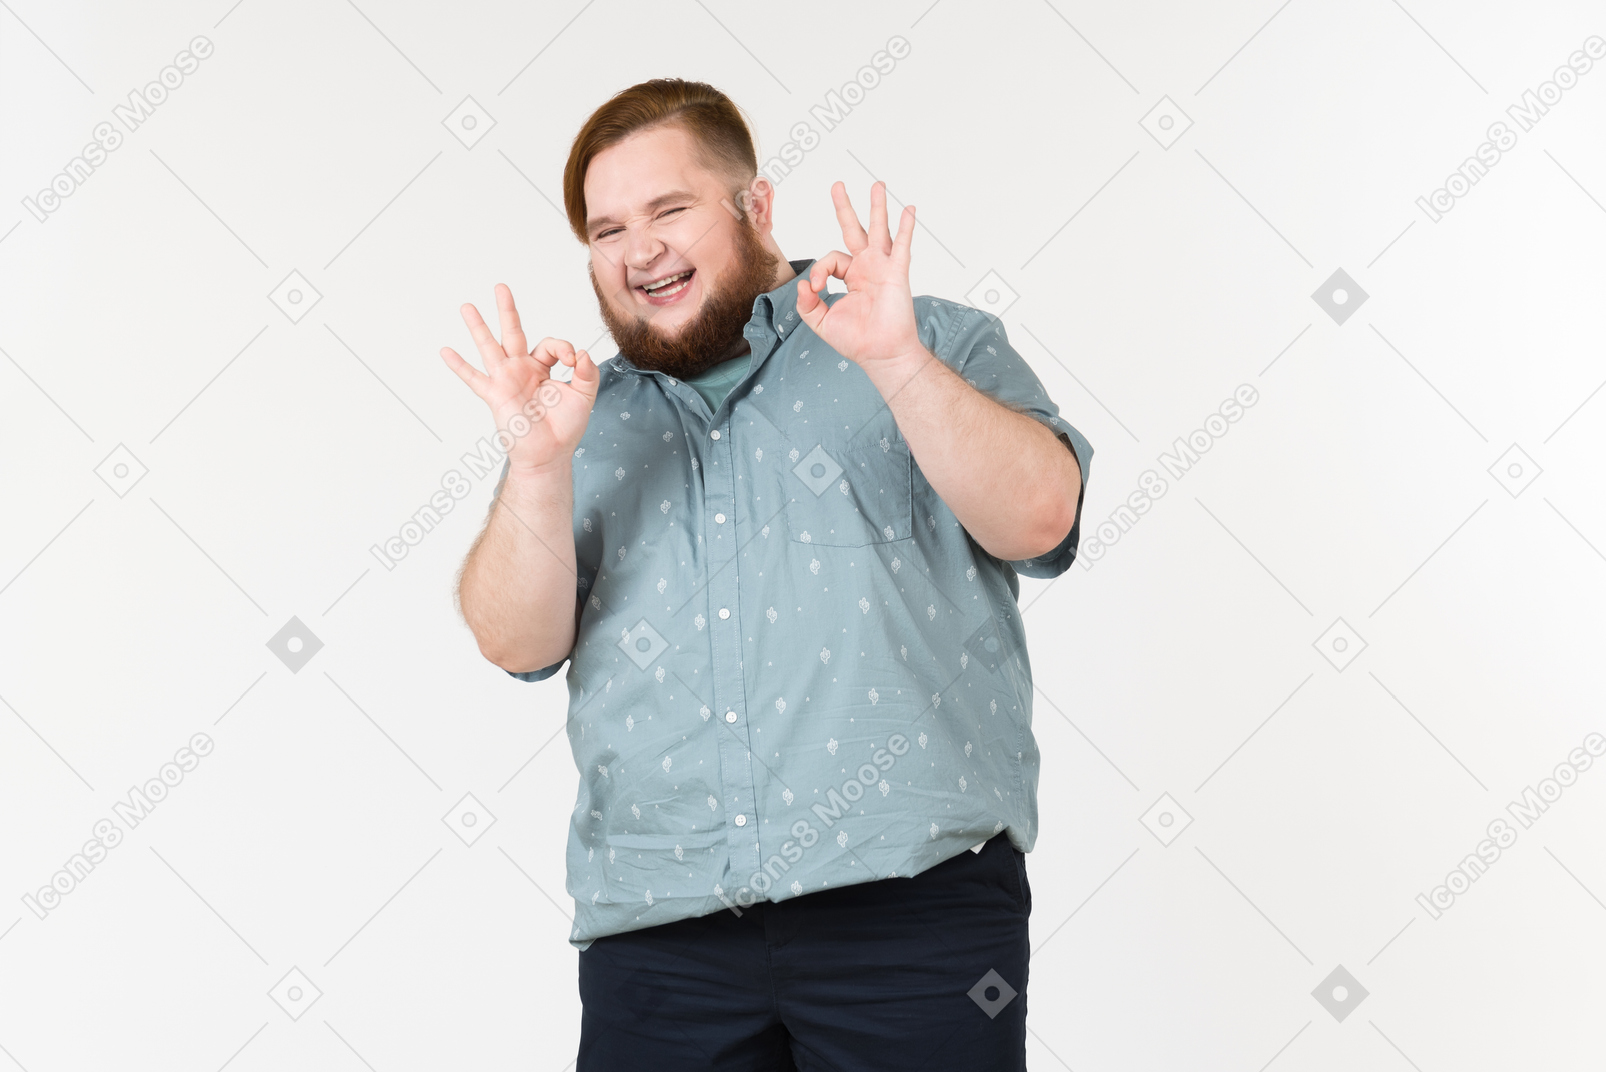 Laughing young overweight man showing ok gesture